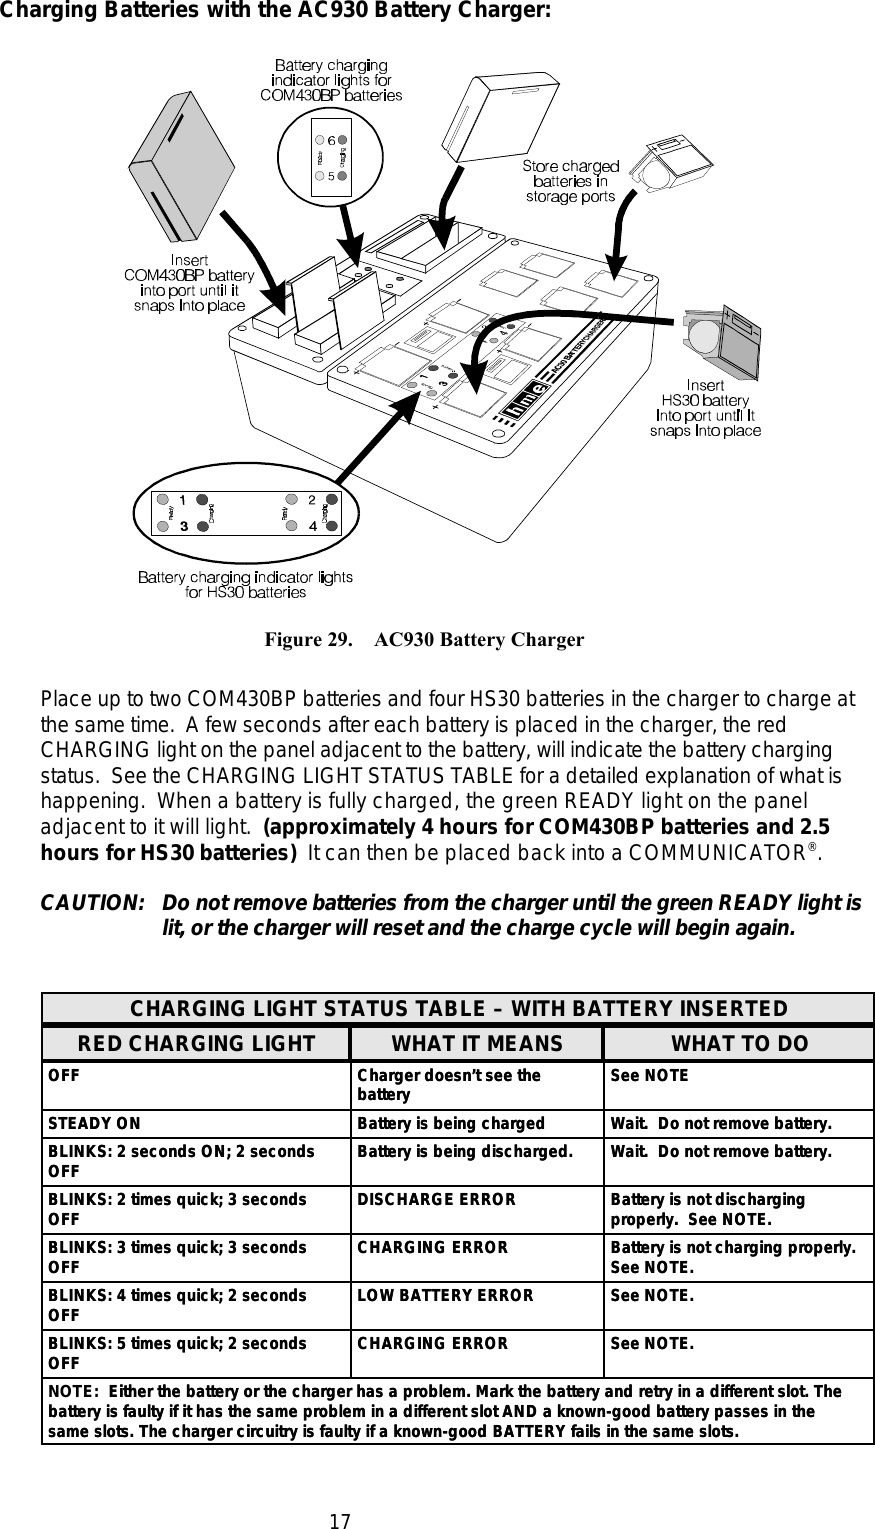 17           Figure 29.    AC930 Battery ChargerCharging Batteries with the AC930 Battery Charger:Place up to two COM430BP batteries and four HS30 batteries in the charger to charge atthe same time.  A few seconds after each battery is placed in the charger, the redCHARGING light on the panel adjacent to the battery, will indicate the battery chargingstatus.  See the CHARGING LIGHT STATUS TABLE for a detailed explanation of what ishappening.  When a battery is fully charged, the green READY light on the paneladjacent to it will light.  (approximately 4 hours for COM430BP batteries and 2.5hours for HS30 batteries)  It can then be placed back into a COMMUNICATOR .®CAUTION: Do not remove batteries from the charger until the green READY light islit, or the charger will reset and the charge cycle will begin again.CHARGING LIGHT STATUS TABLE – WITH BATTERY INSERTEDRED CHARGING LIGHT WHAT IT MEANS WHAT TO DOOFFOFF Charger doesn’t see theCharger doesn’t see the See NOTESee NOTEbatterybatterySTEADY ONSTEADY ON Battery is being chargedBattery is being charged Wait.  Do not remove battery.Wait.  Do not remove battery.BLINKS: 2 seconds ON; 2 secondsBLINKS: 2 seconds ON; 2 seconds Battery is being discharged.Battery is being discharged. Wait.  Do not remove battery.Wait.  Do not remove battery.OFFOFFBLINKS: 2 times quick; 3 secondsBLINKS: 2 times quick; 3 seconds DISCHARGE ERRORDISCHARGE ERROR Battery is not dischargingBattery is not dischargingOFFOFF properly.  See NOTE.properly.  See NOTE.BLINKS: 3 times quick; 3 secondsBLINKS: 3 times quick; 3 seconds CHARGING ERRORCHARGING ERROR Battery is not charging properly. Battery is not charging properly. OFFOFF See NOTE.See NOTE.BLINKS: 4 times quick; 2 secondsBLINKS: 4 times quick; 2 seconds LOW BATTERY ERRORLOW BATTERY ERROR See NOTE.See NOTE.OFFOFFBLINKS: 5 times quick; 2 secondsBLINKS: 5 times quick; 2 seconds CHARGING ERRORCHARGING ERROR See NOTE.See NOTE.OFFOFFNOTE:  Either the battery or the charger has a problem. Mark the battery and retry in a different slot. The  Either the battery or the charger has a problem. Mark the battery and retry in a different slot. Thebattery is faulty if it has the same problem in a different slot AND a known-good battery passes in thebattery is faulty if it has the same problem in a different slot AND a known-good battery passes in thesame slots. The charger circuitry is faulty if a known-good BATTERY fails in the same slots.same slots. The charger circuitry is faulty if a known-good BATTERY fails in the same slots.